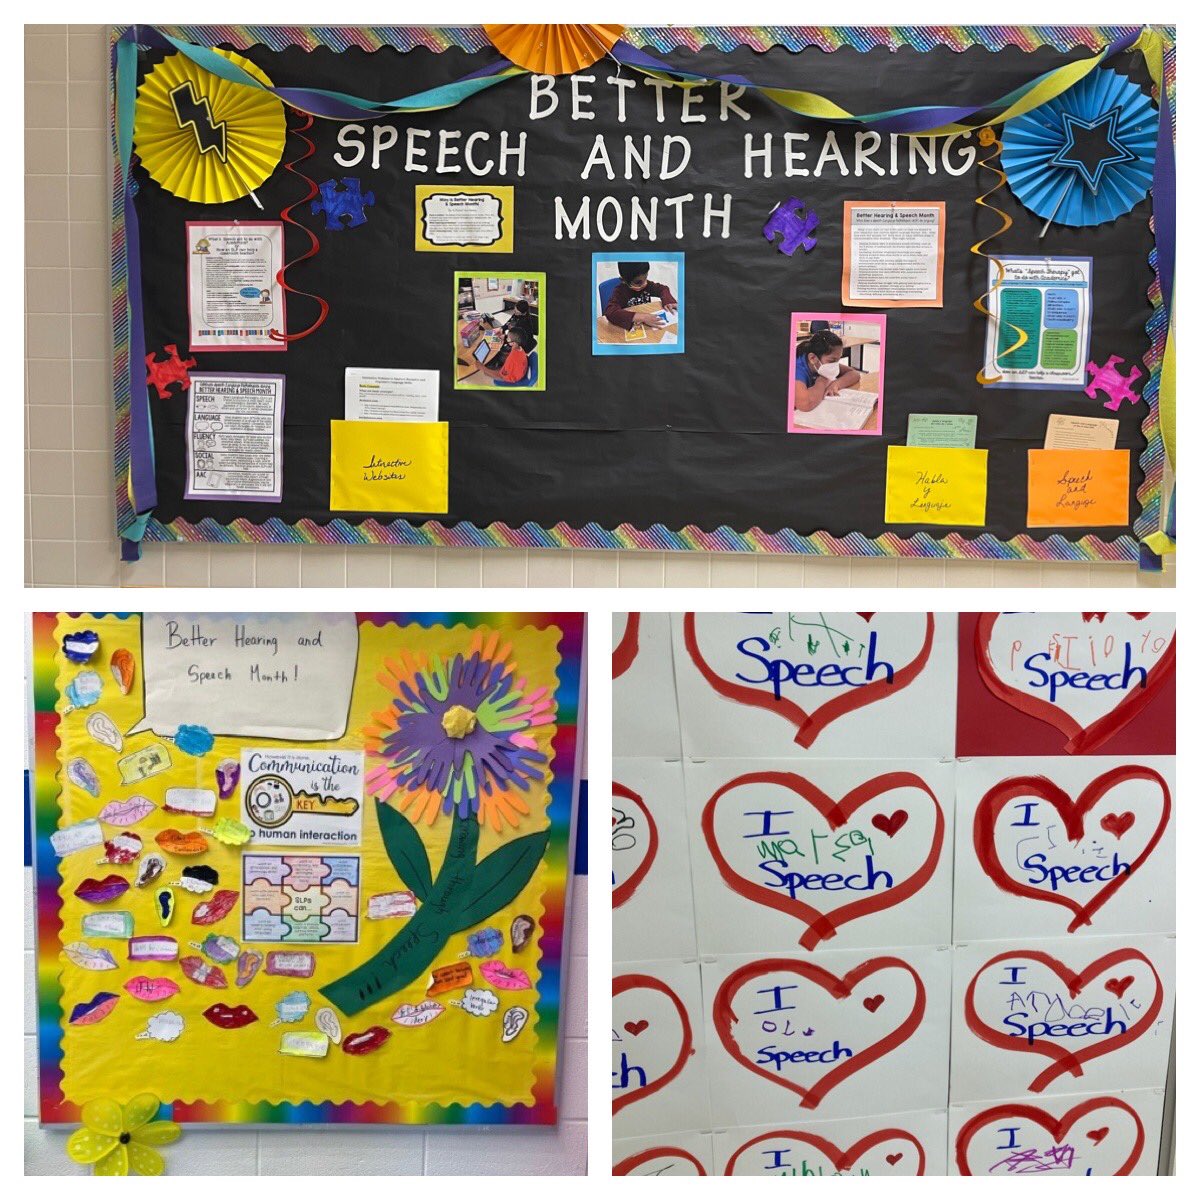 Creative bulletin boards done by our amazing speech therapists to celebrate Better Speech and Hearing Month!!#simplythebest #ourstudentsarethebest @EISDofSA @EISDSpecial